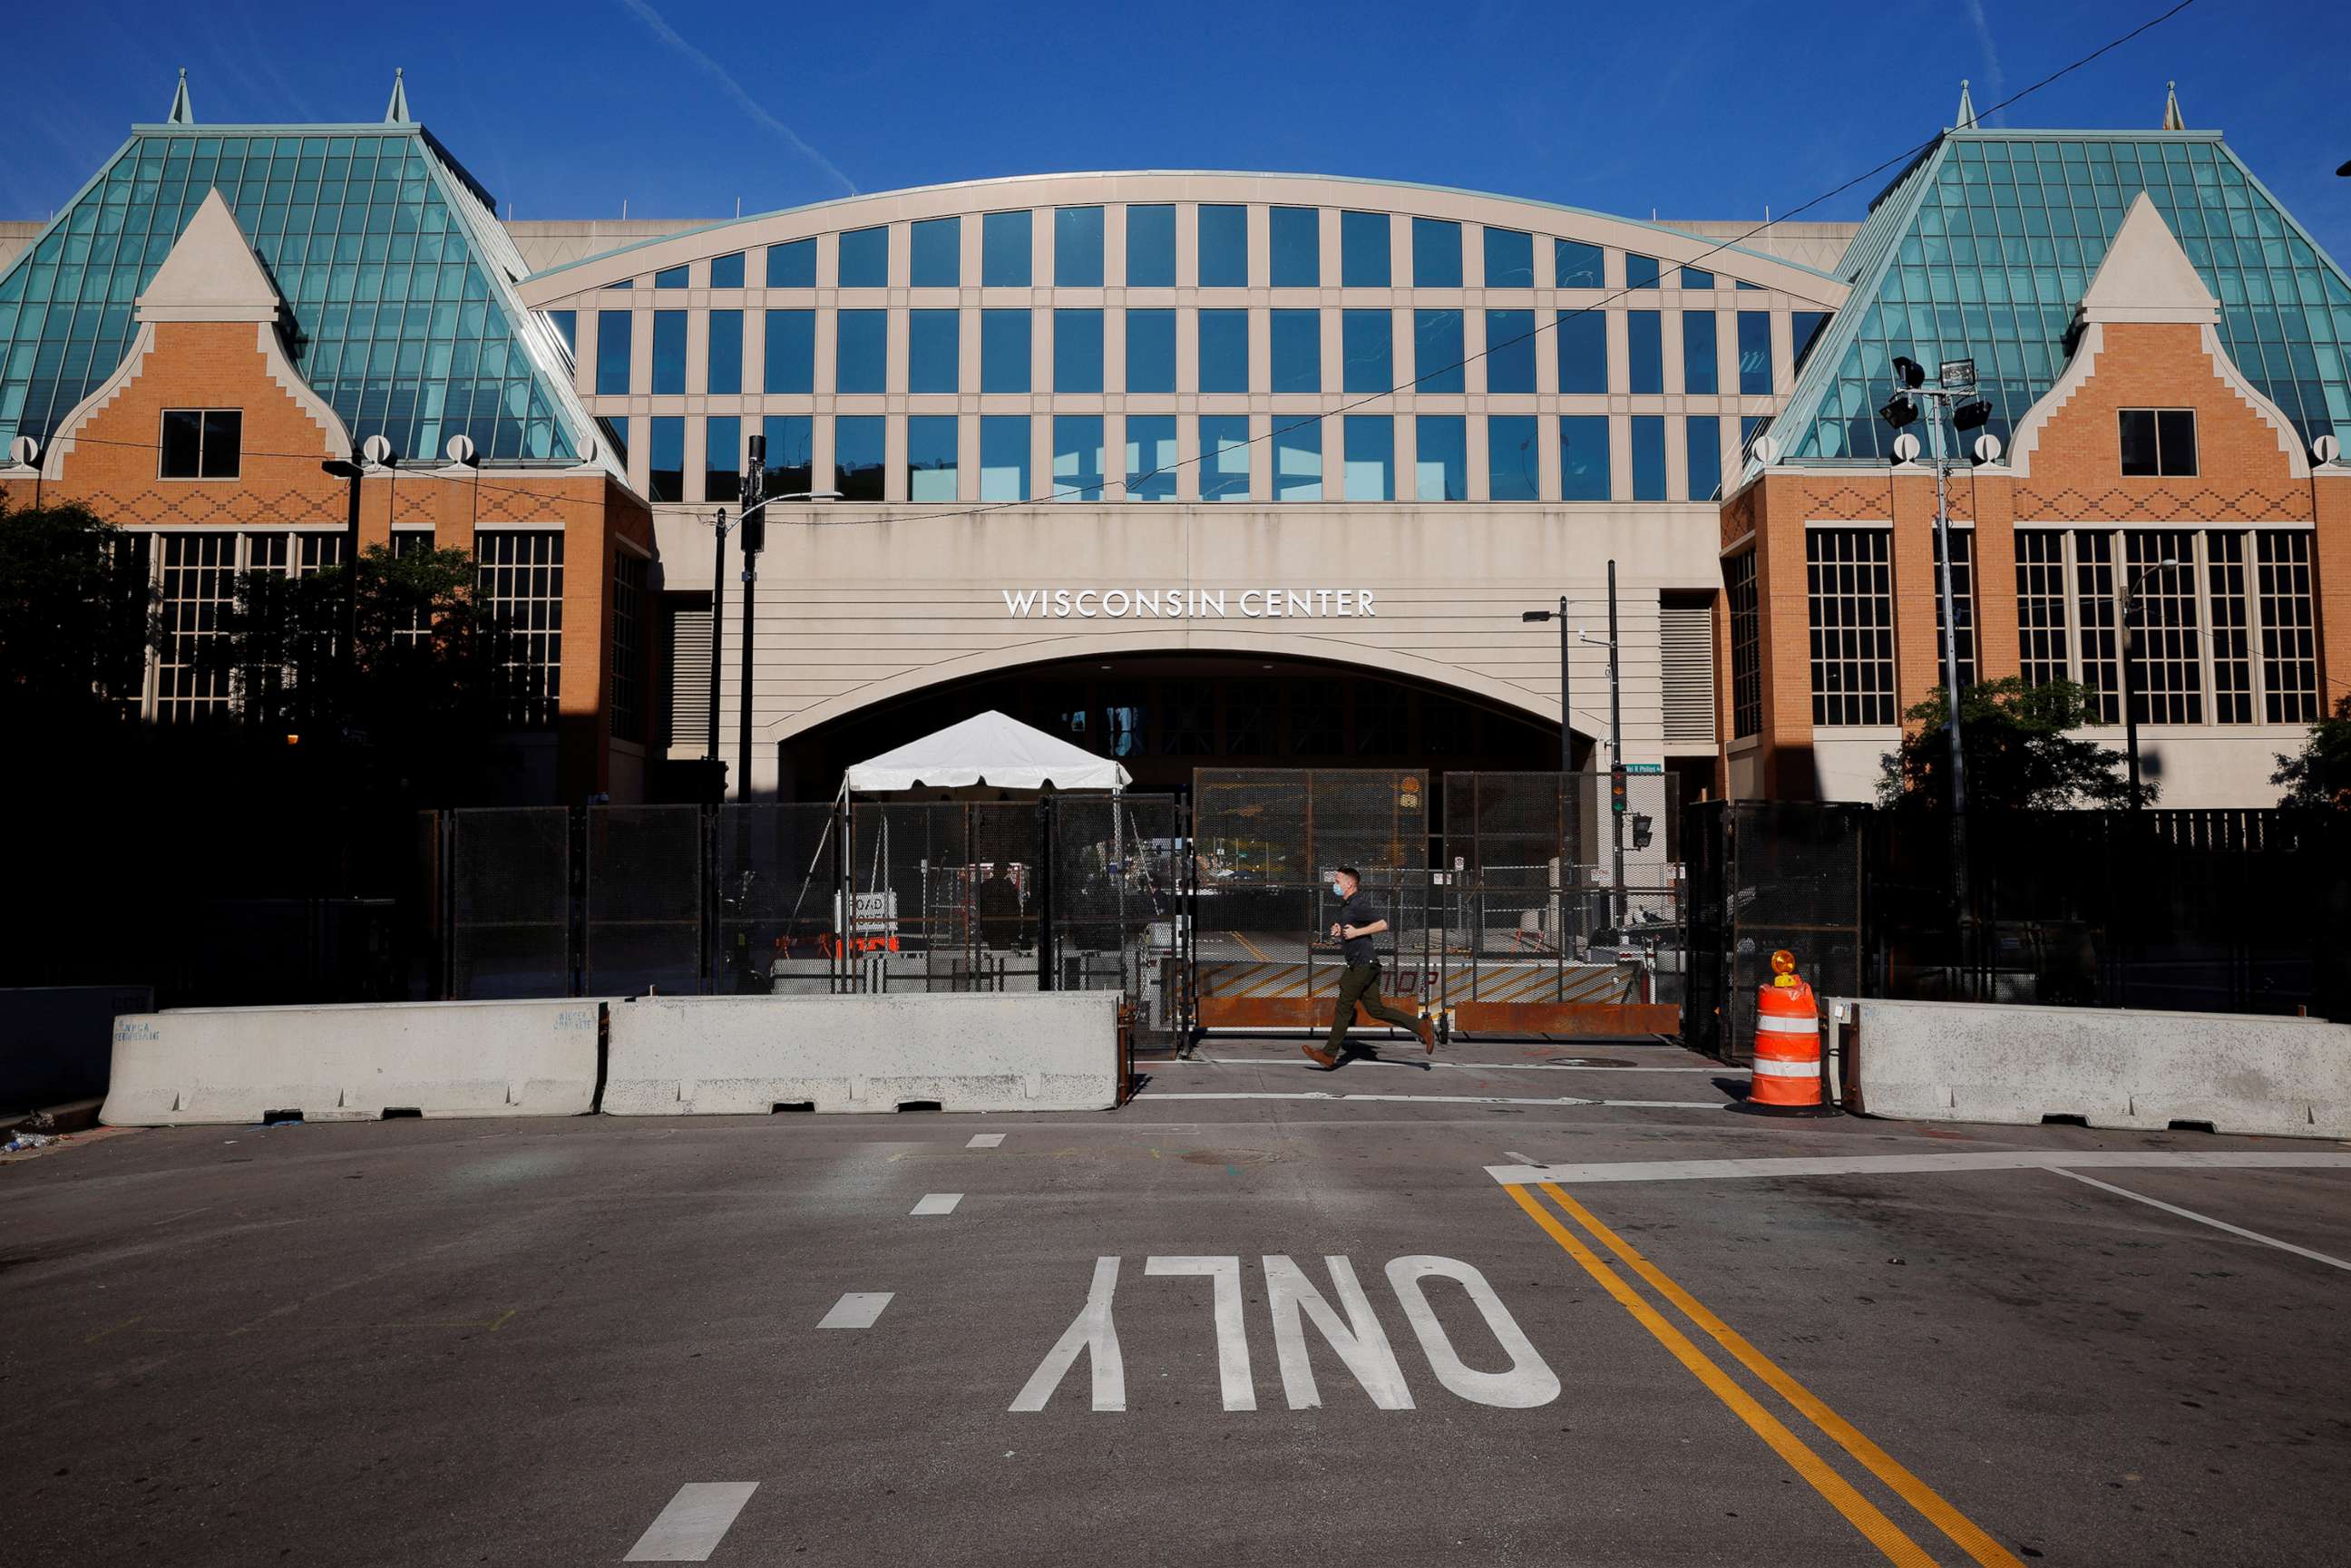 PHOTO: Security fencing surrounds the Wisconsin Center, the site of the Democratic National Convention (DNC), which will be a largely virtual event due to the coronavirus pandemic, in Milwaukee, Aug. 17, 2020.